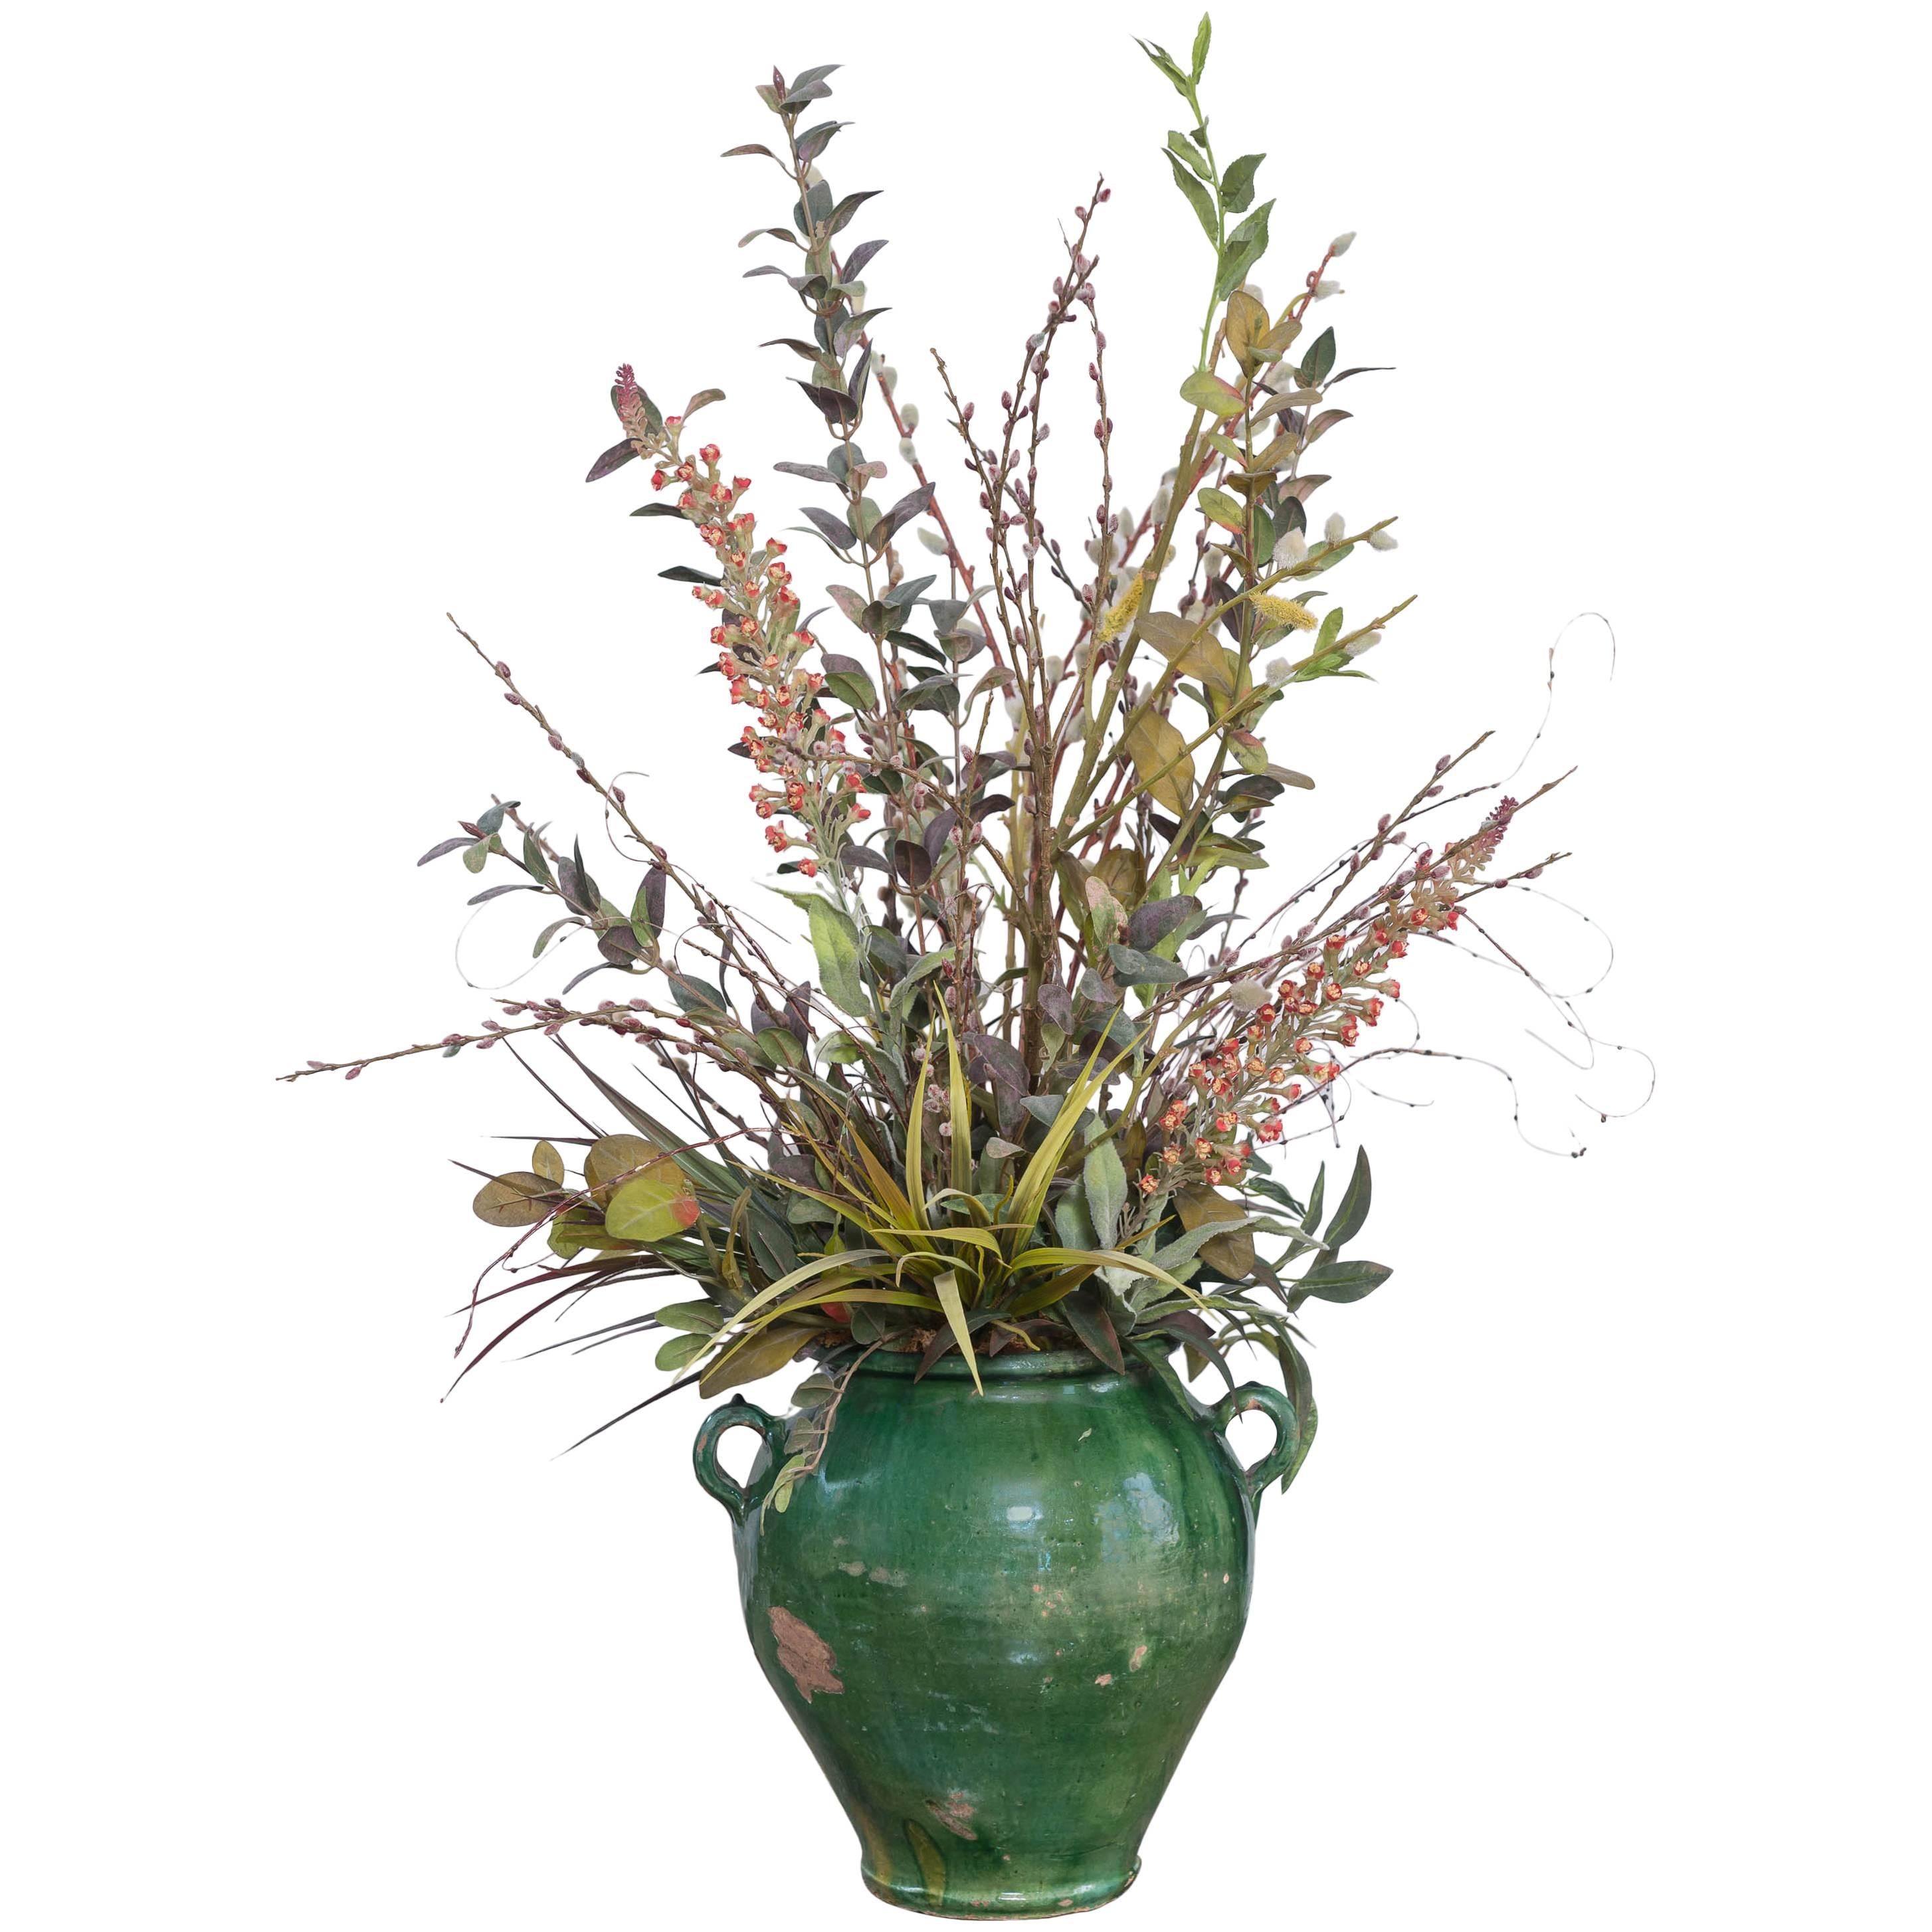 Exquisite Rustic Green Glazed Terracotta Jardinièr with Faux Floral Display For Sale